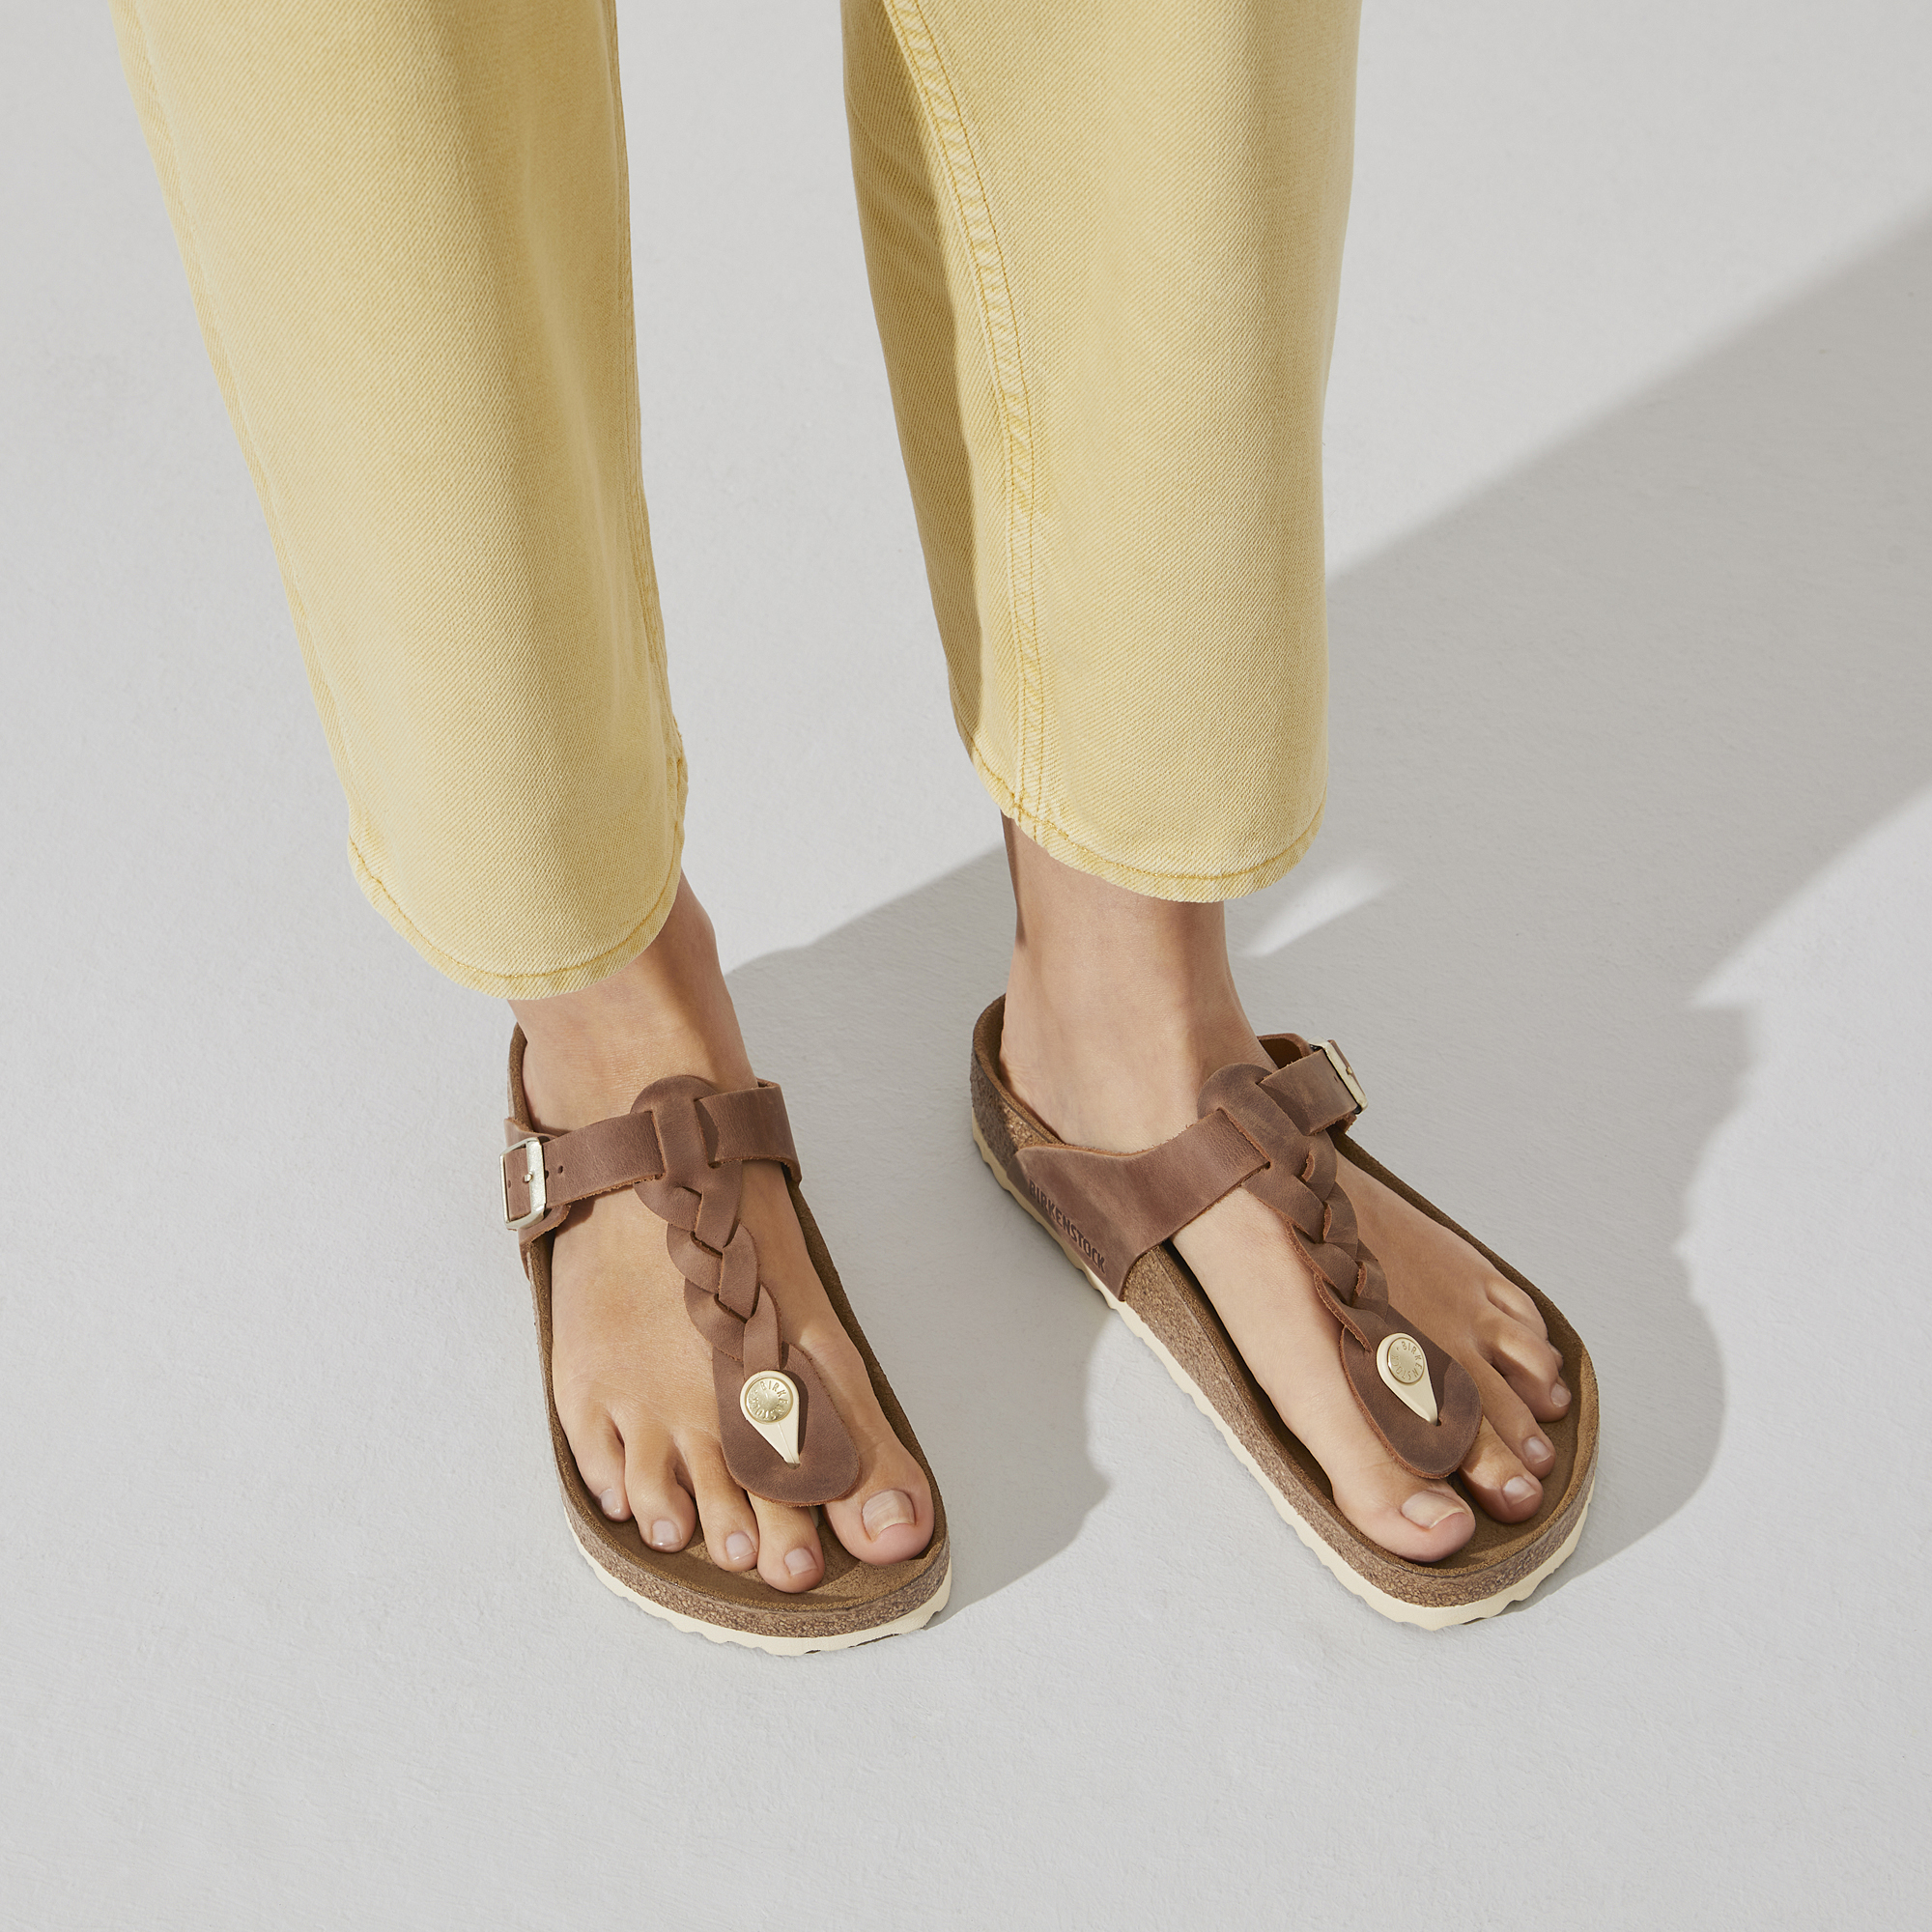 Sound Feet Shoes on X: The Gizeh - a modern thong sandal from BIRKENSTOCK.  The Gizeh is a proven classic with signature support and a new braided  style. #birkenstock #sandals #shoes #styleinspo #